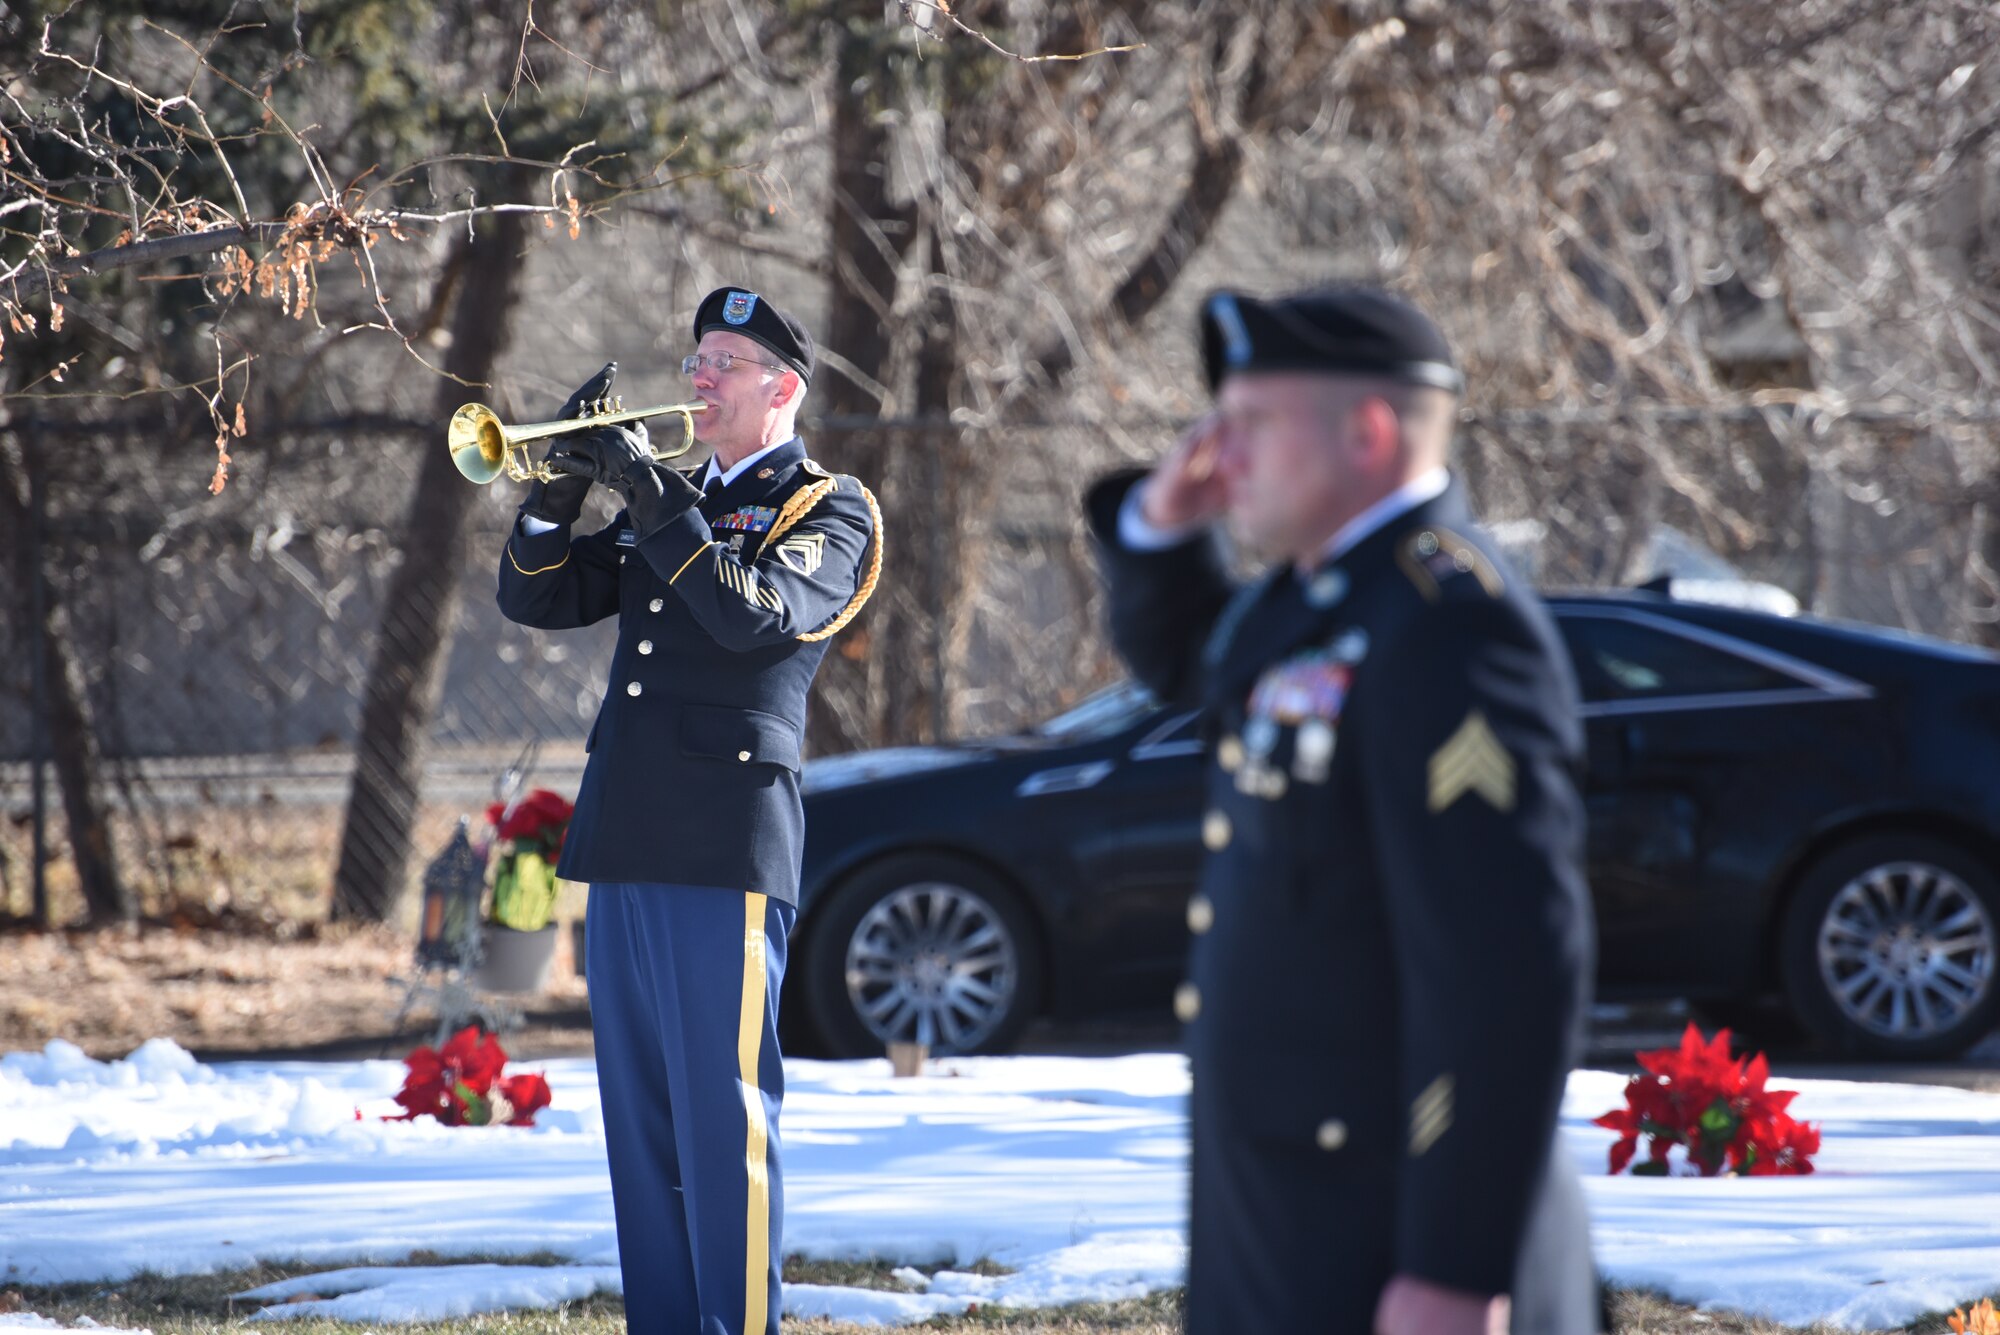 U.S. Army National Guard Staff Sgt. Lance Christiensen with 101st Army Band renders military honors for Medal of Honor recipient U.S. Army Pvt. George “Joe” Sakato at Fairmount Cemetery in Denver, Jan. 16, 2016. Sakato distinguished himself by extraordinary heroism in action Oct. 29, 1944, on Hill 617 in the vicinity of Biffontaine, France. (U.S. Army National Guard photo by Staff Sgt. Manda Walters/Released)